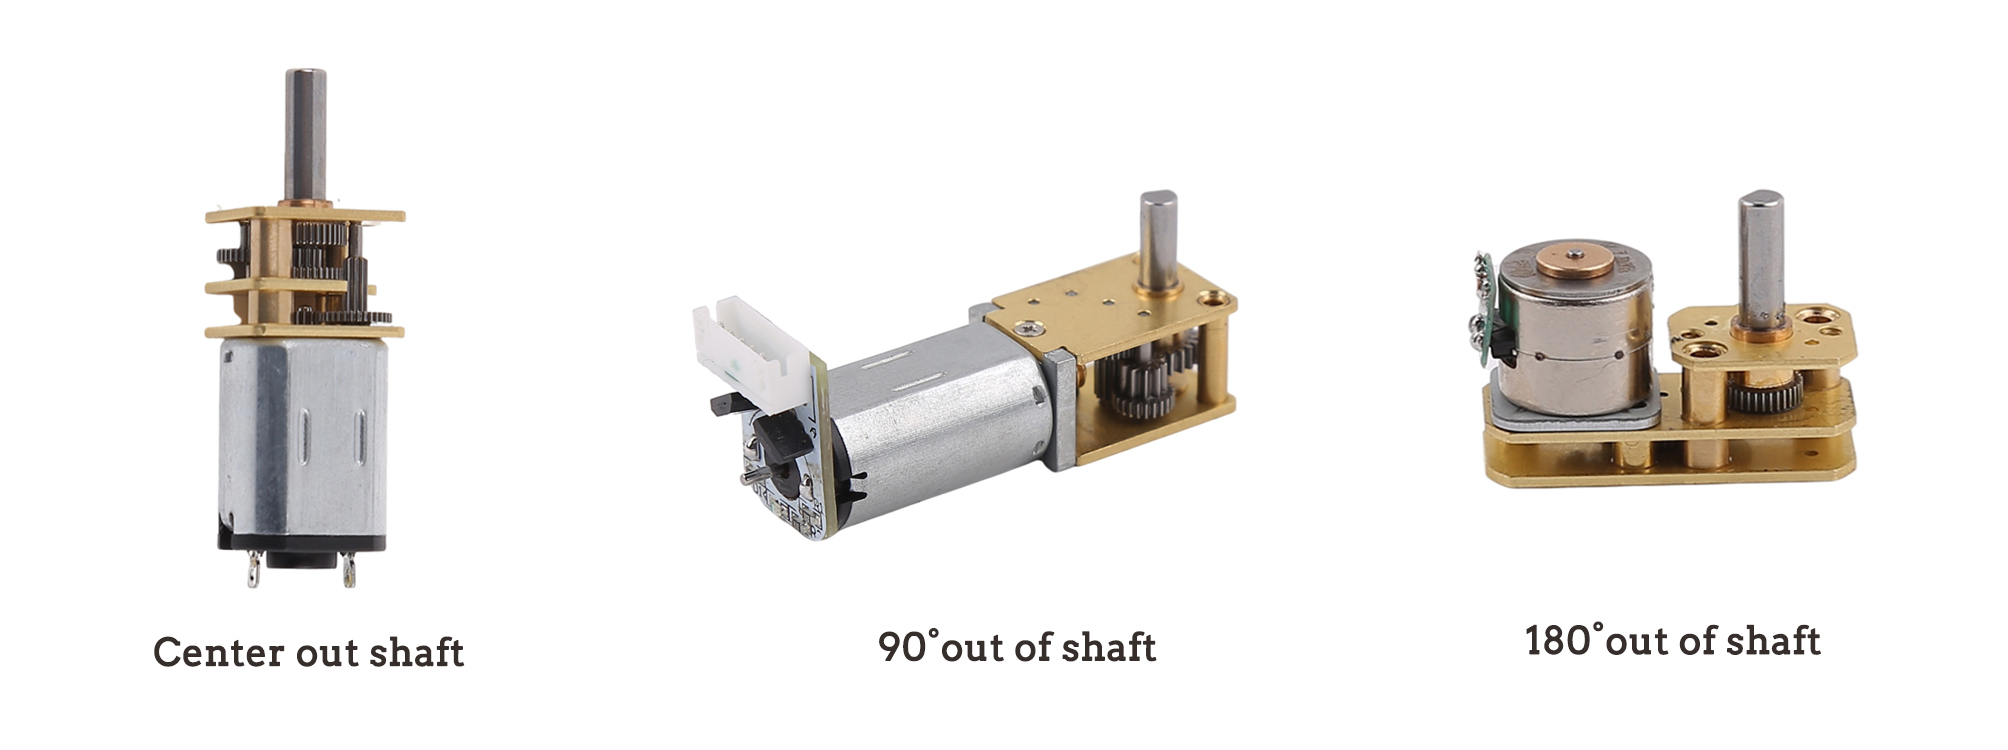 What are the advantages of different shaft-out methods of miniature geared motors